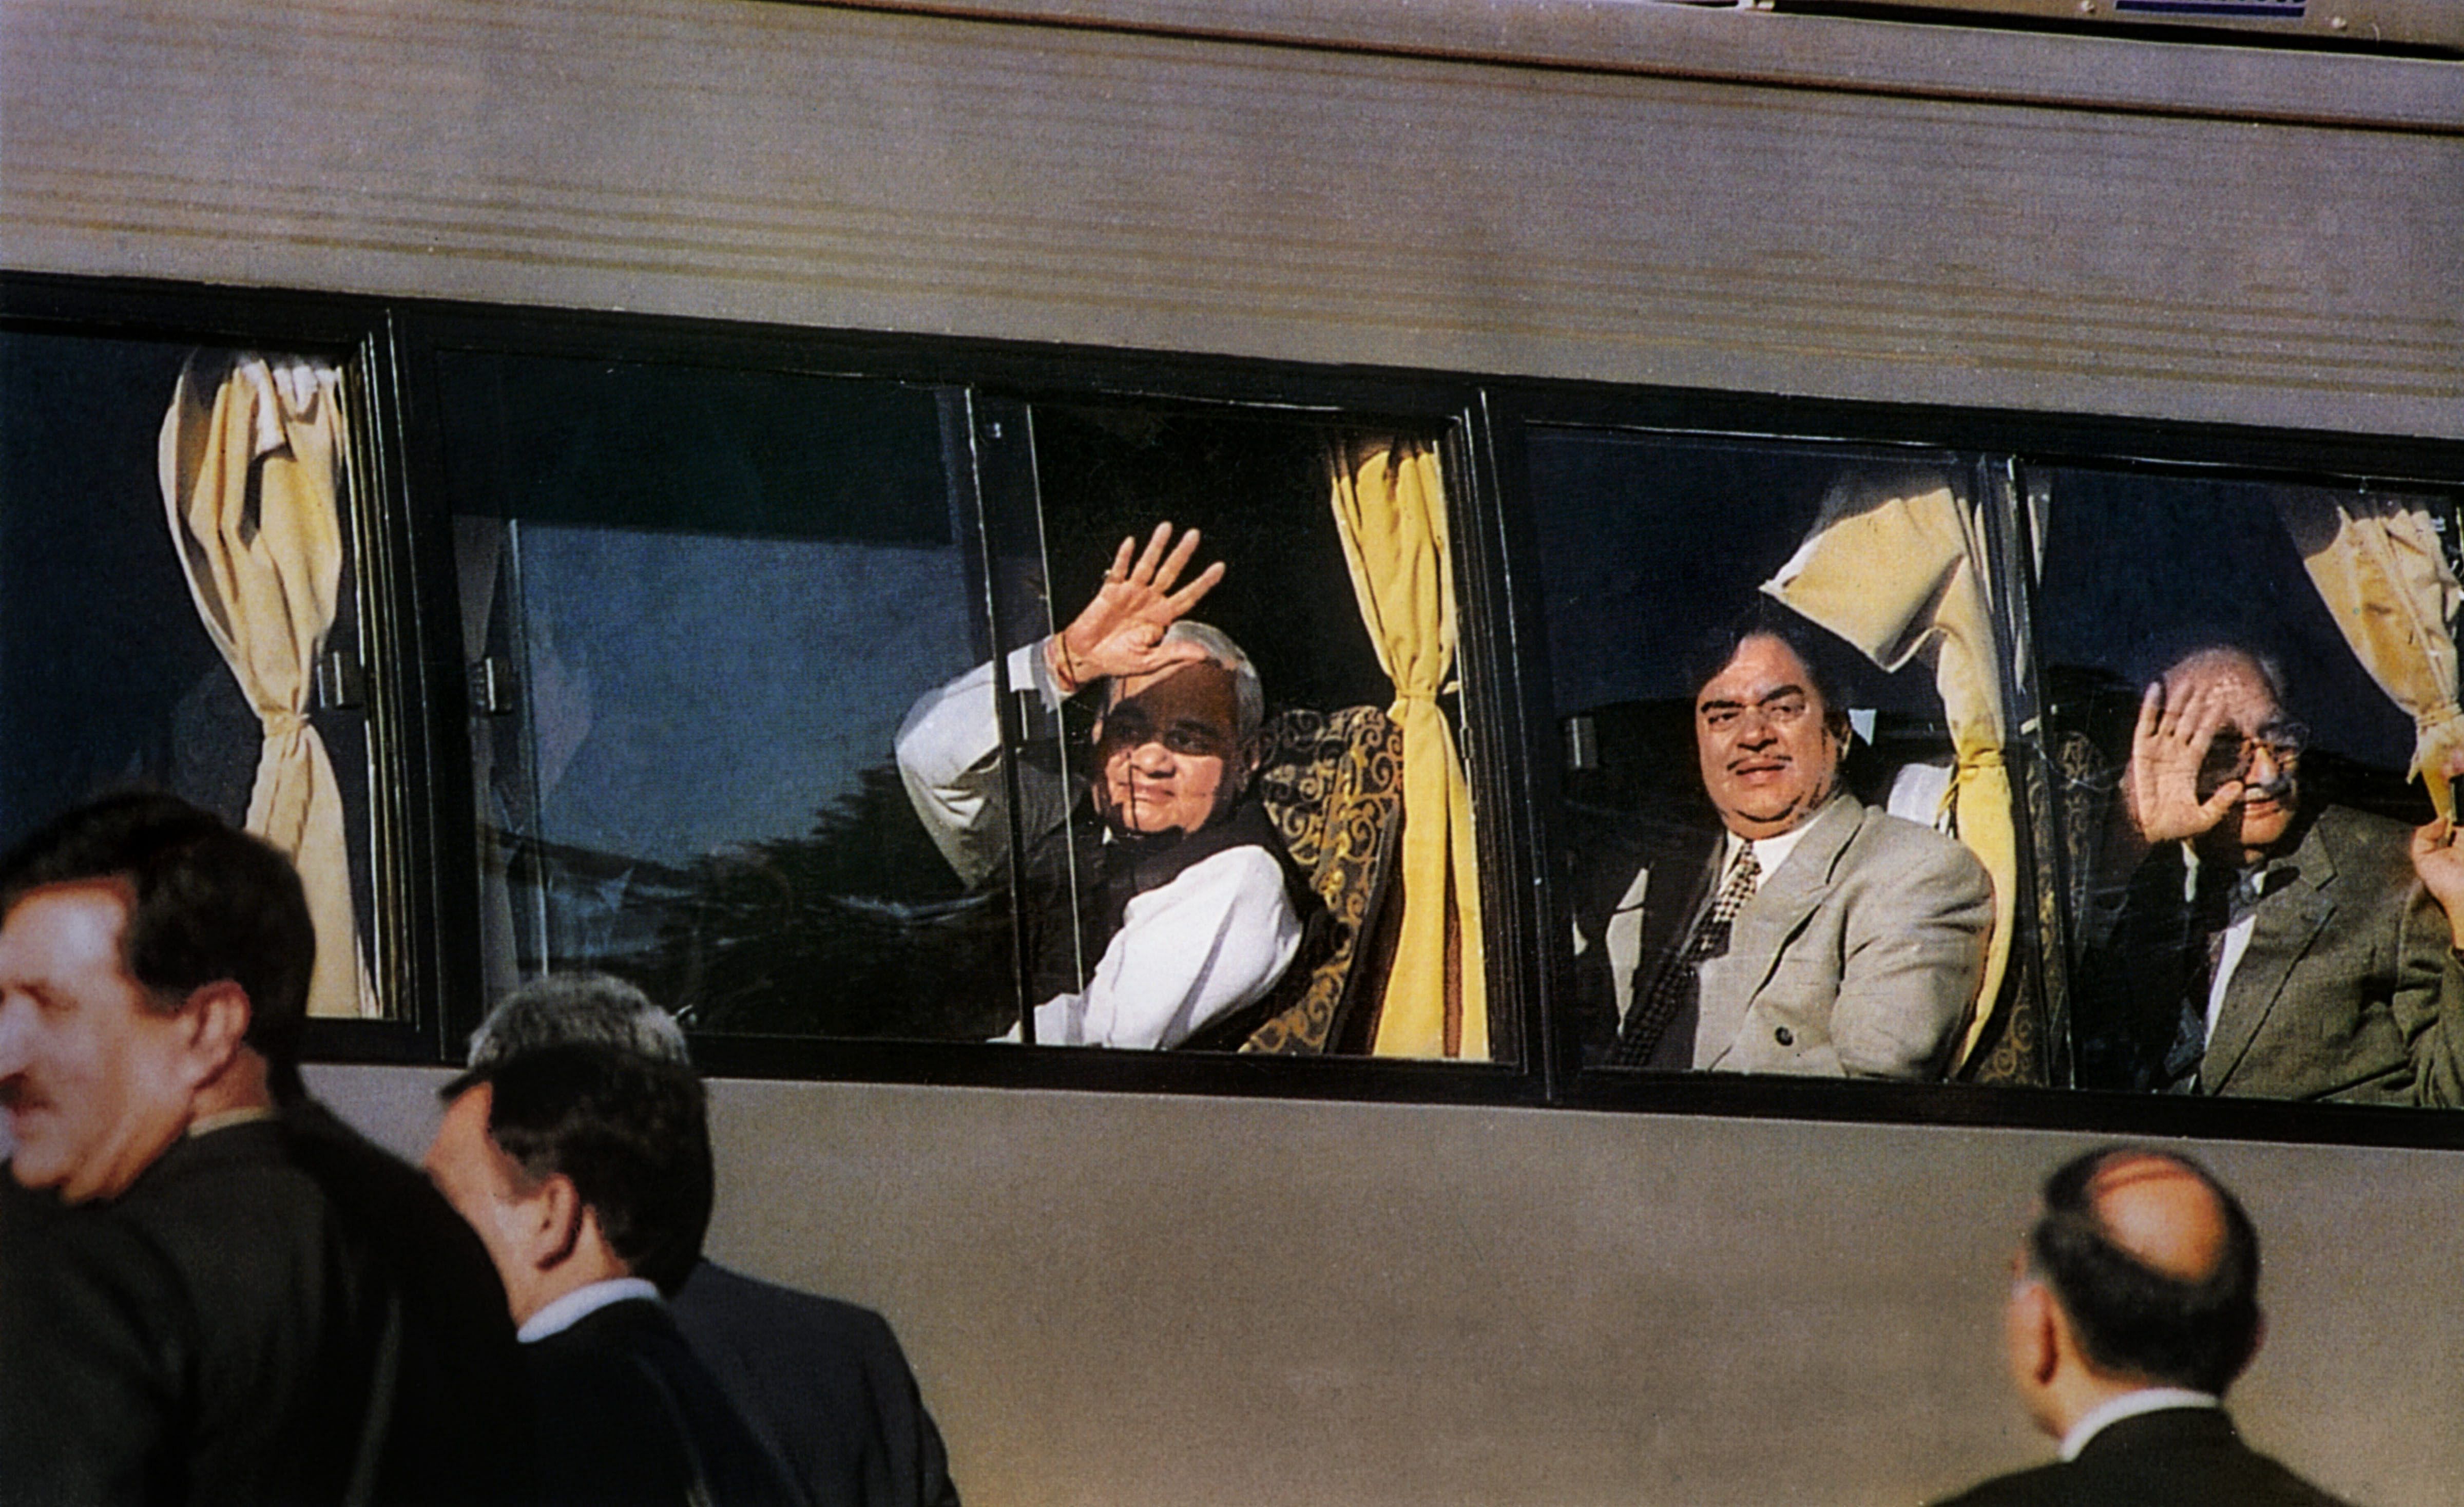 Former prime minister Atal Bihari Vajpayee waves from the maiden Delhi-Lahore bus service on his arrival at Lahore to attend a summit. (PTI File Photo)